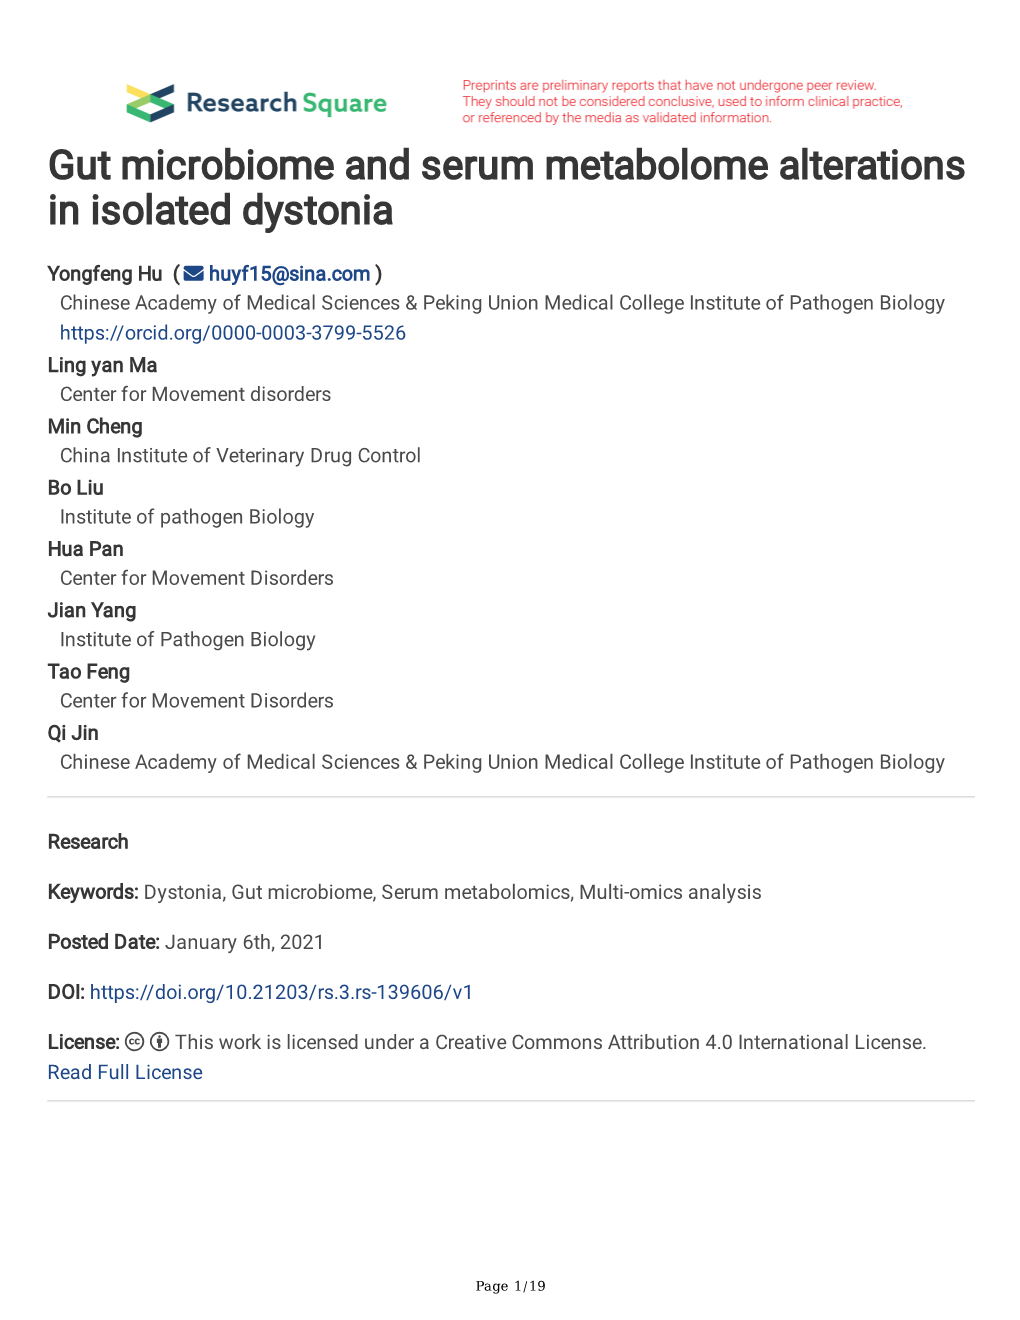 Gut Microbiome and Serum Metabolome Alterations in Isolated Dystonia